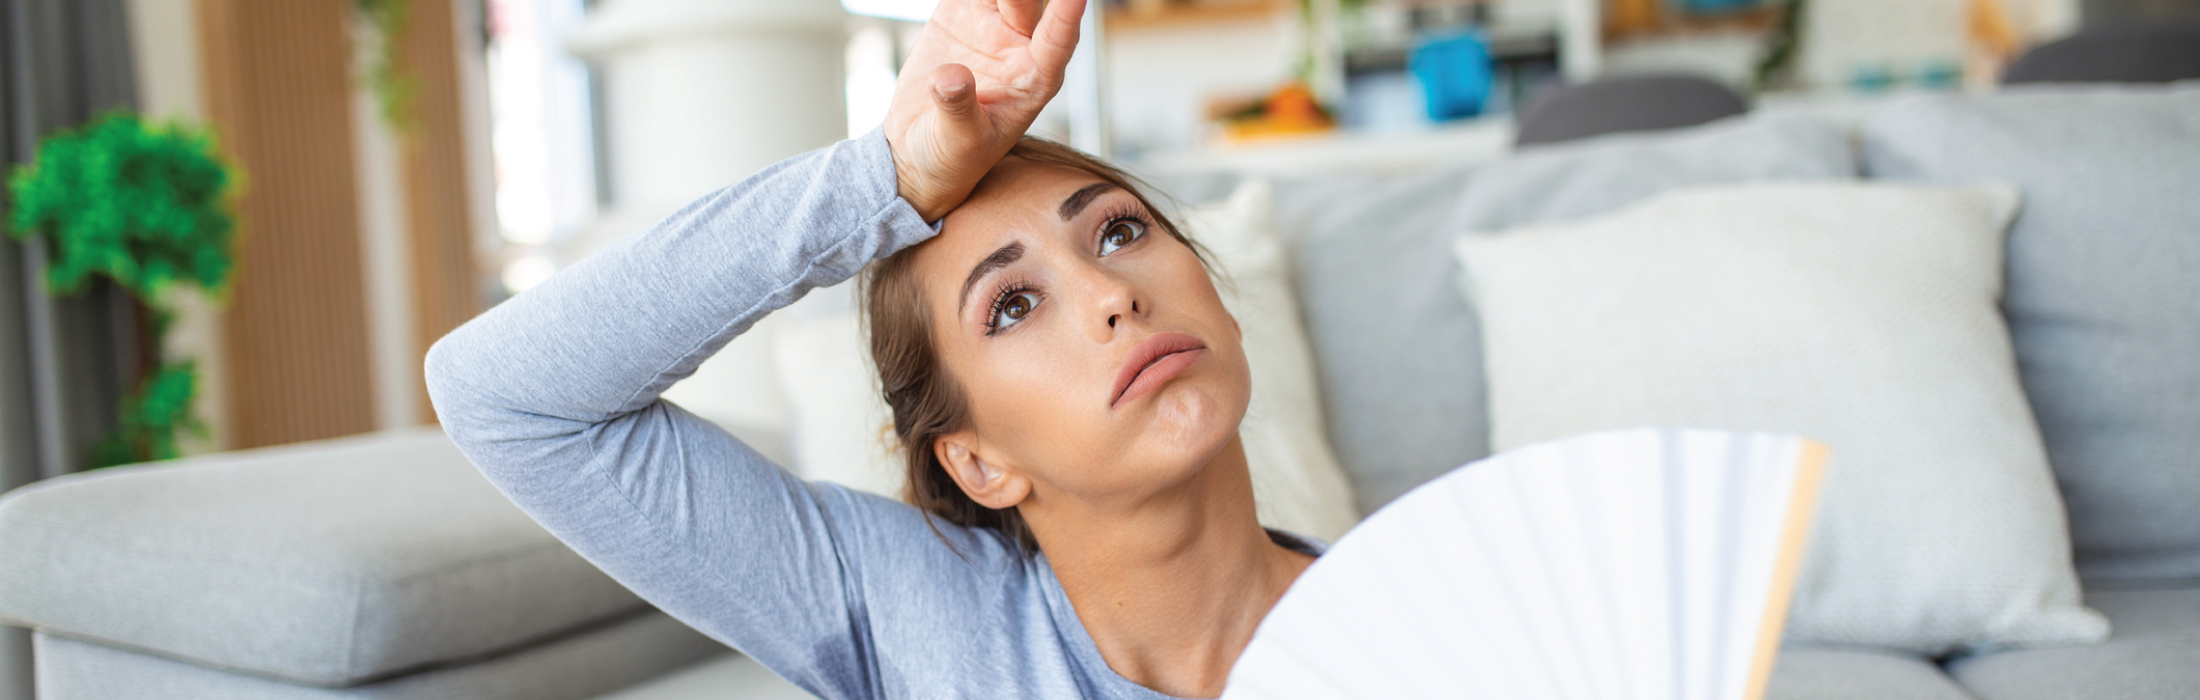 women feeling frustrated by HVAC with hand against forehead